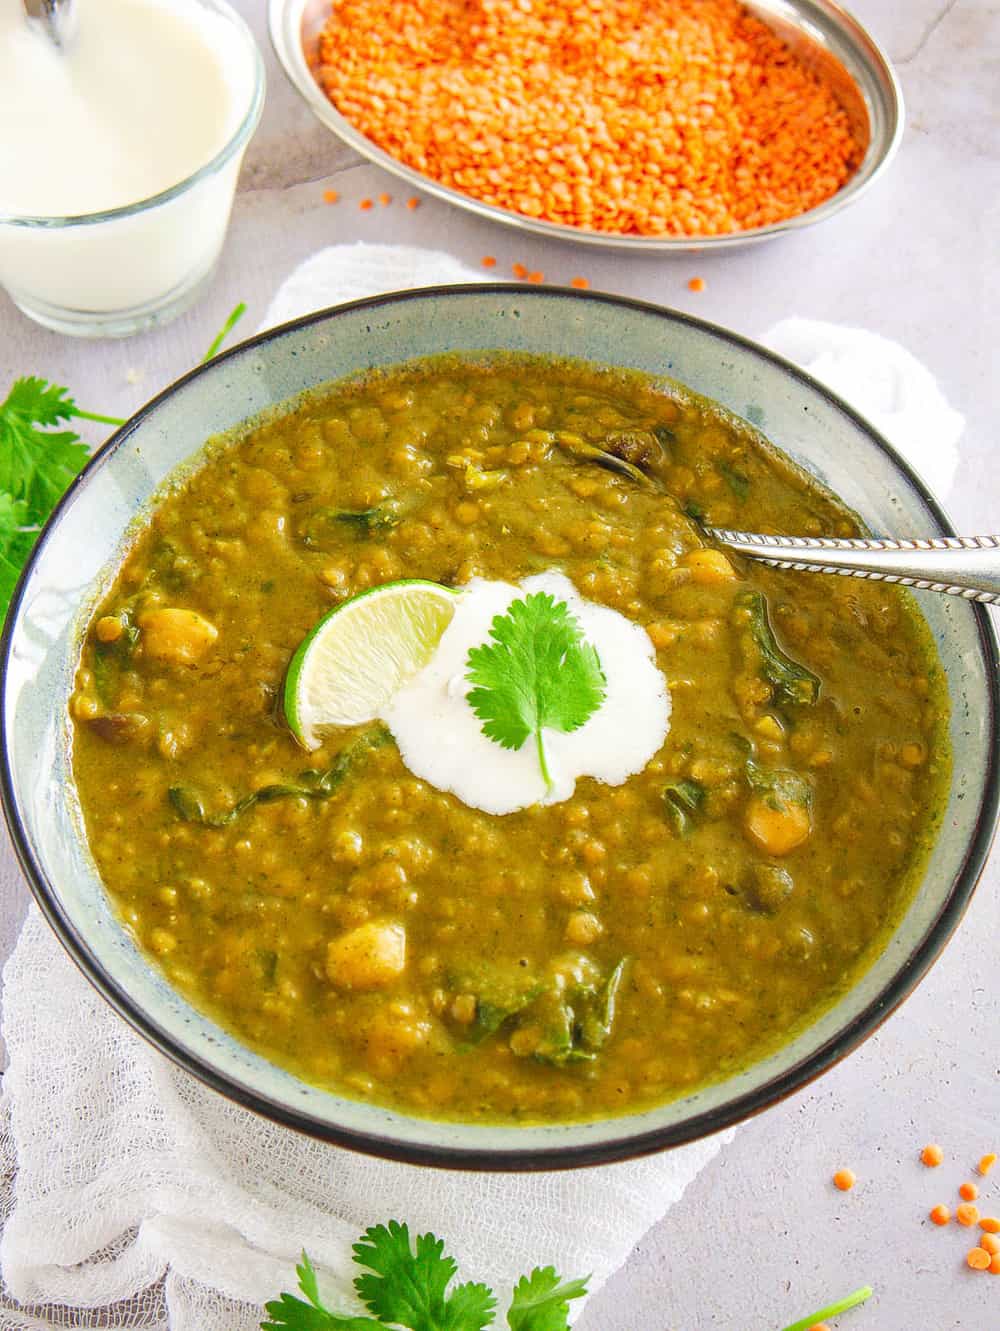 Lentil soup with Swiss chard served in a bowl